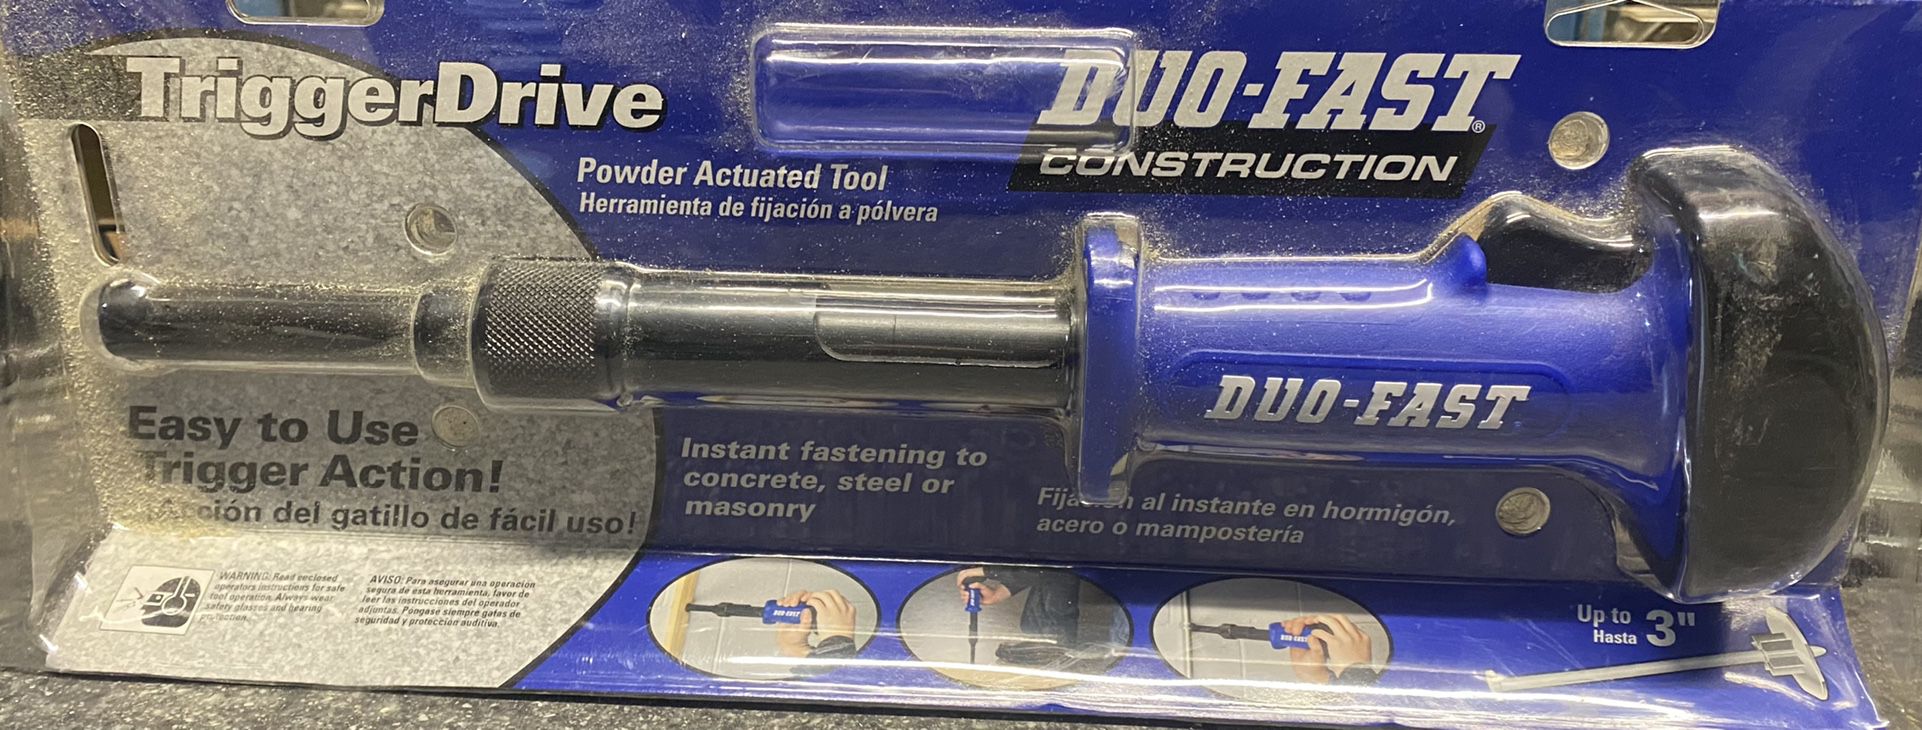 Power Actuated Tool